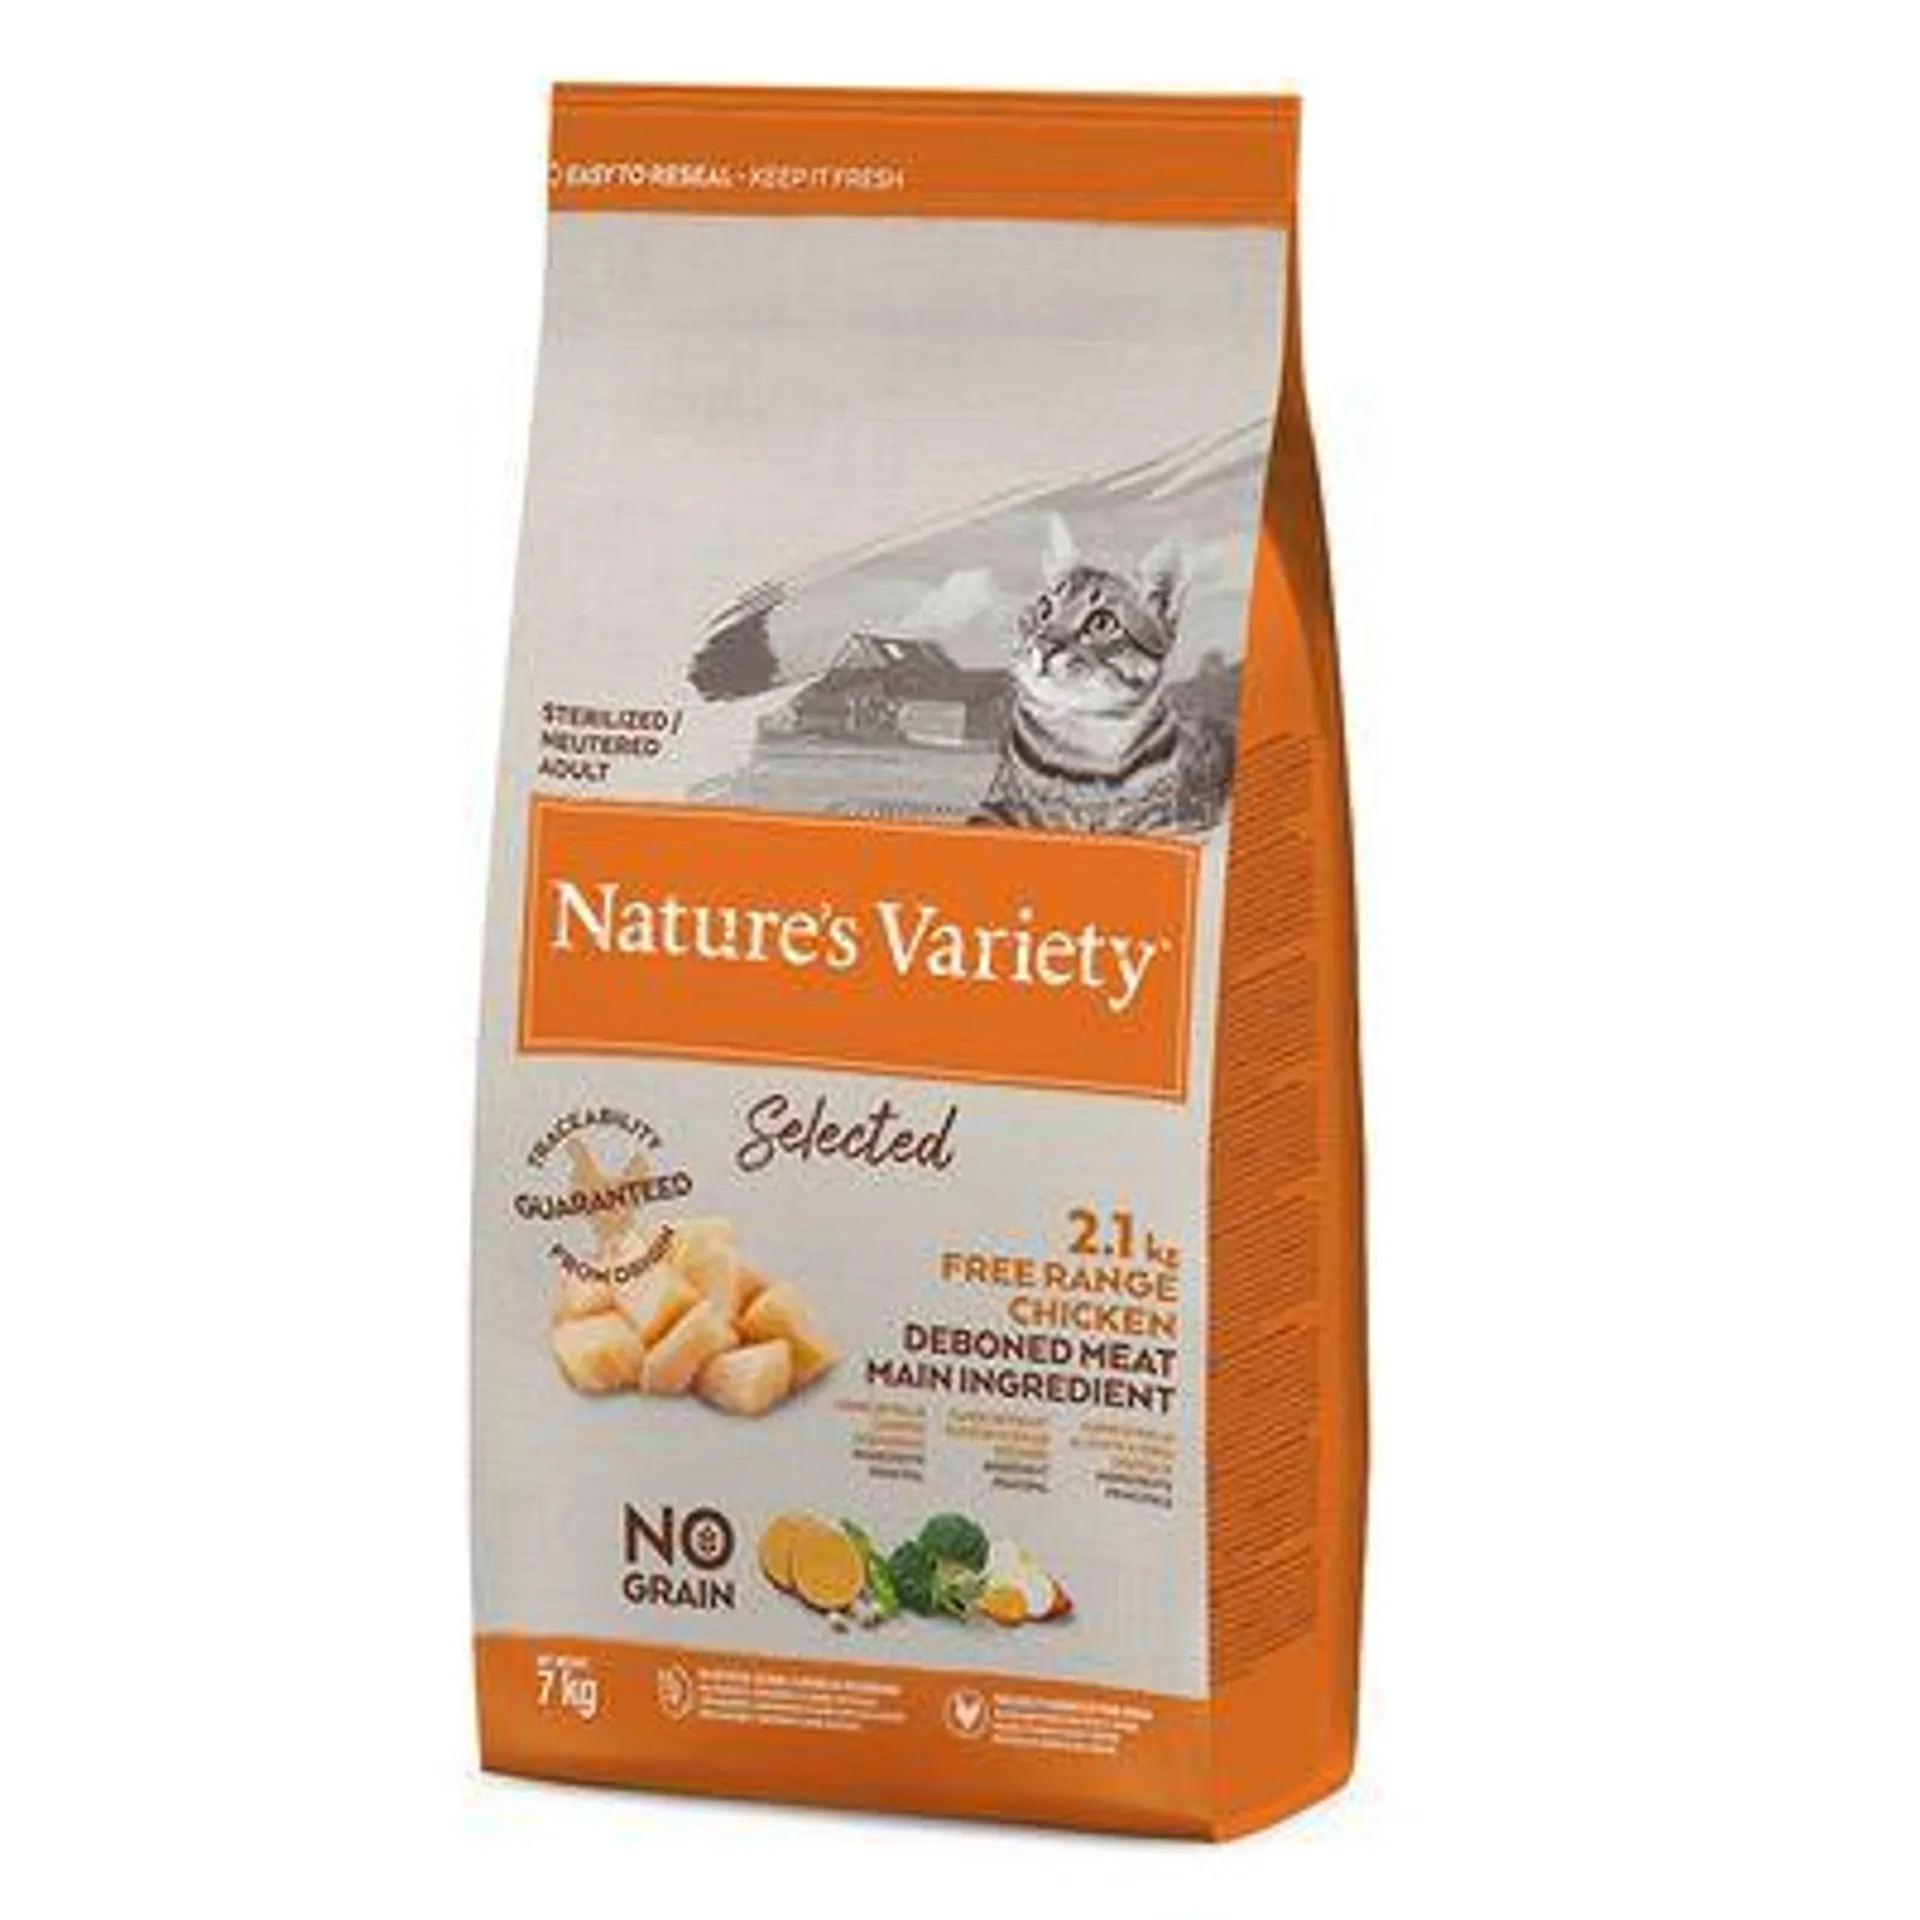 Nature's Variety Dry Cat Food - 15% Off! *